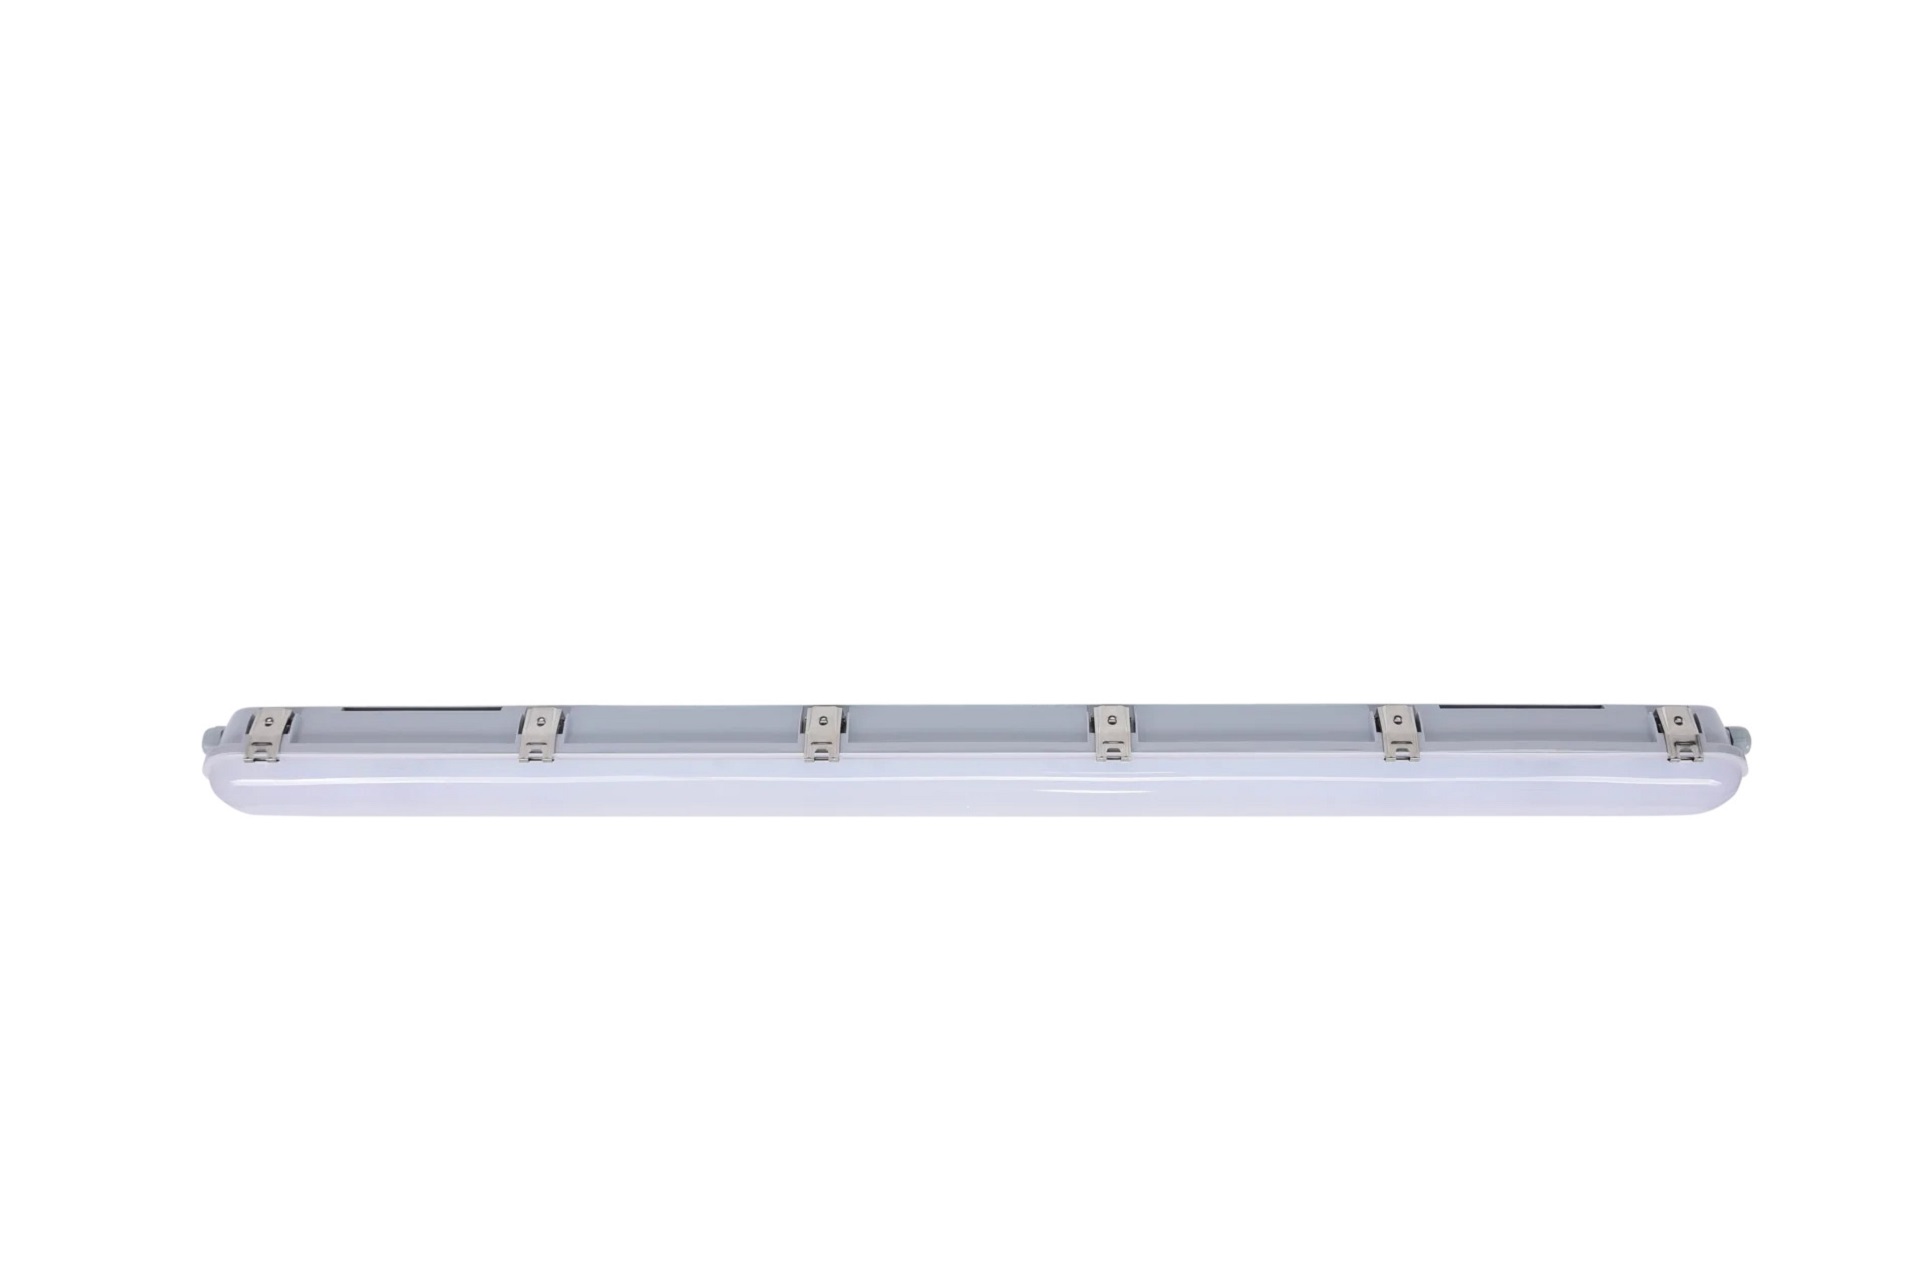 Casambi LED-Feuchtraumleuchte 36W 4400lm 4000K 1220mm